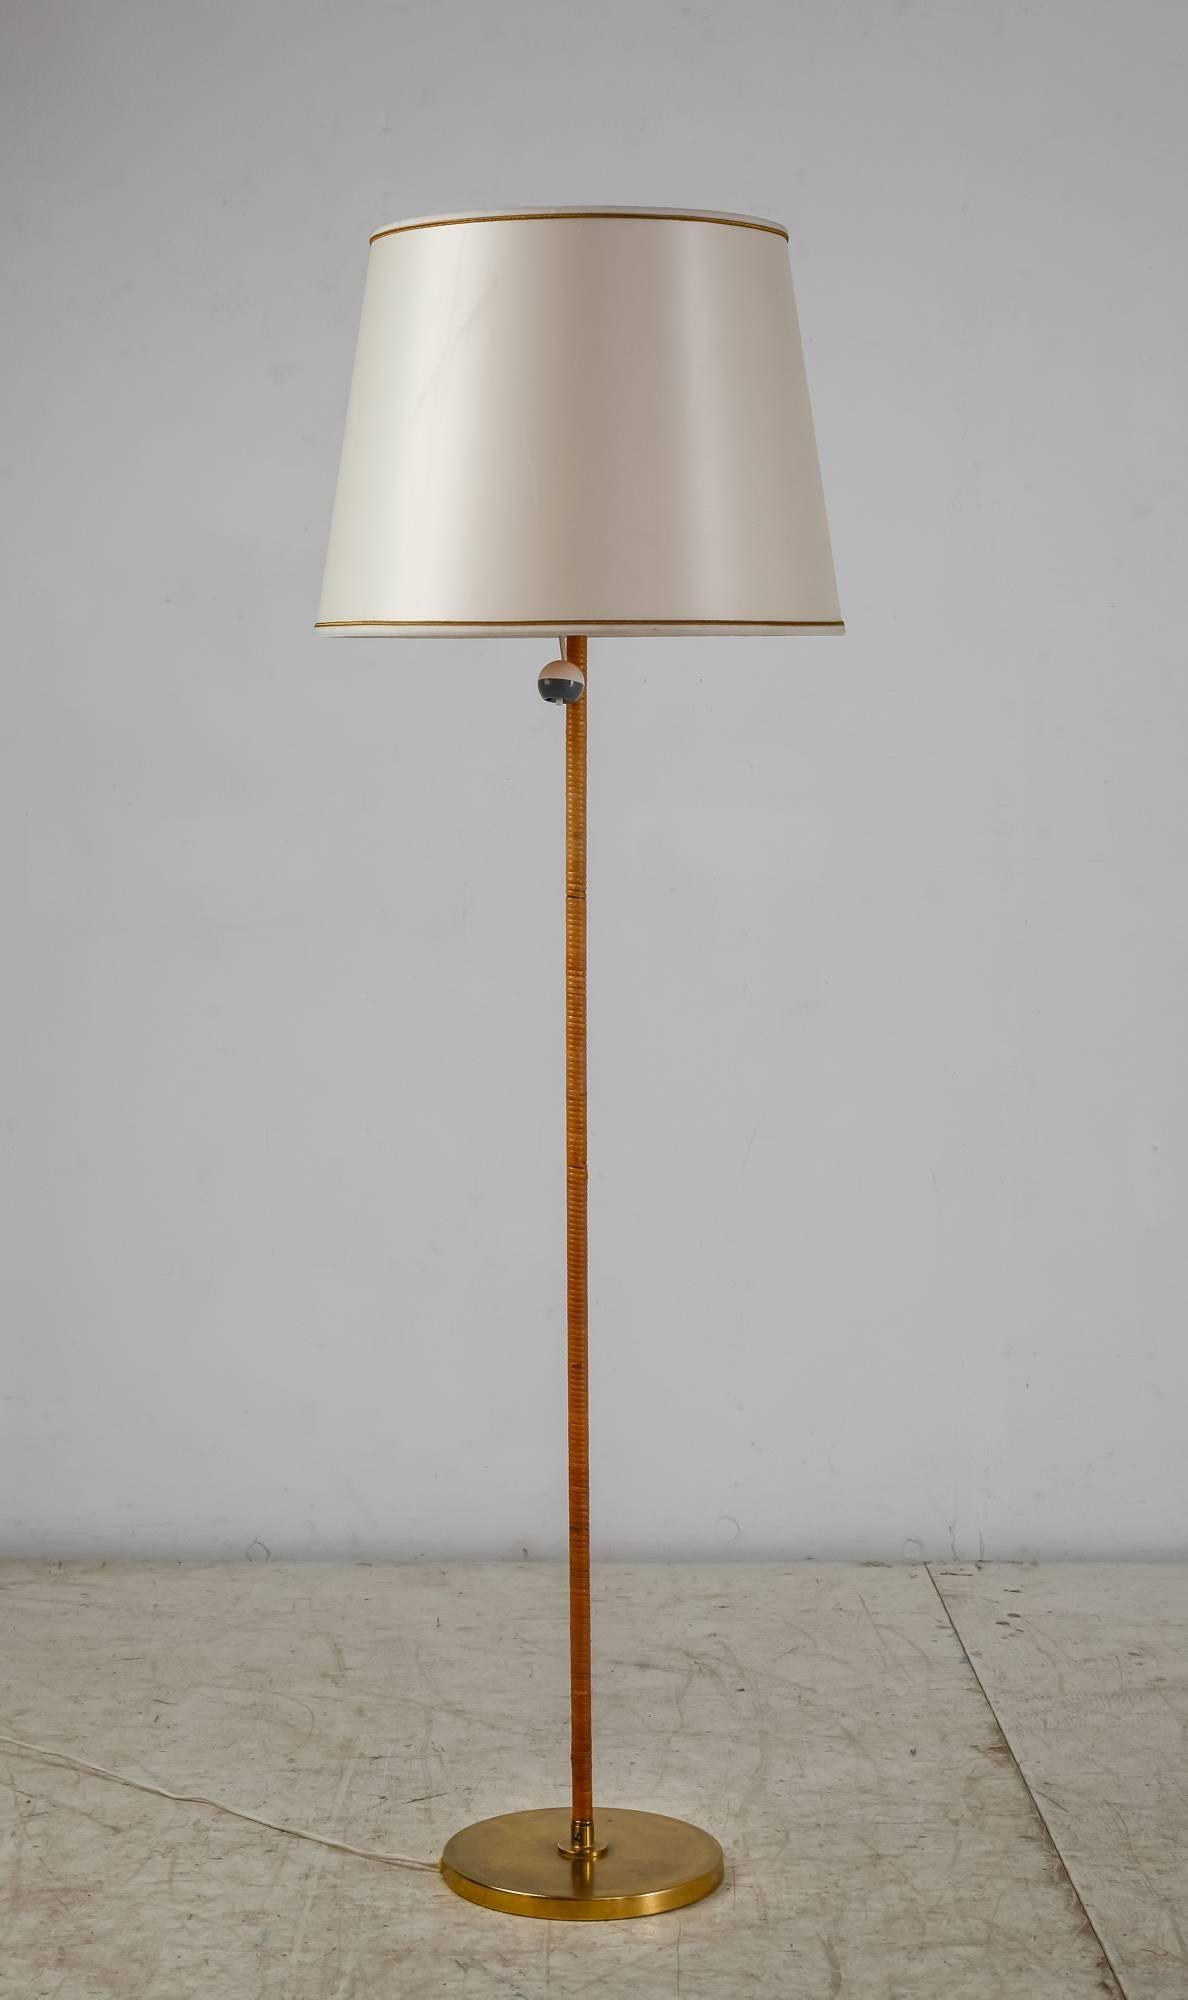 Scandinavian Modern Brass Floor Lamp with Cane Covered Stem, Finland, 1950s For Sale